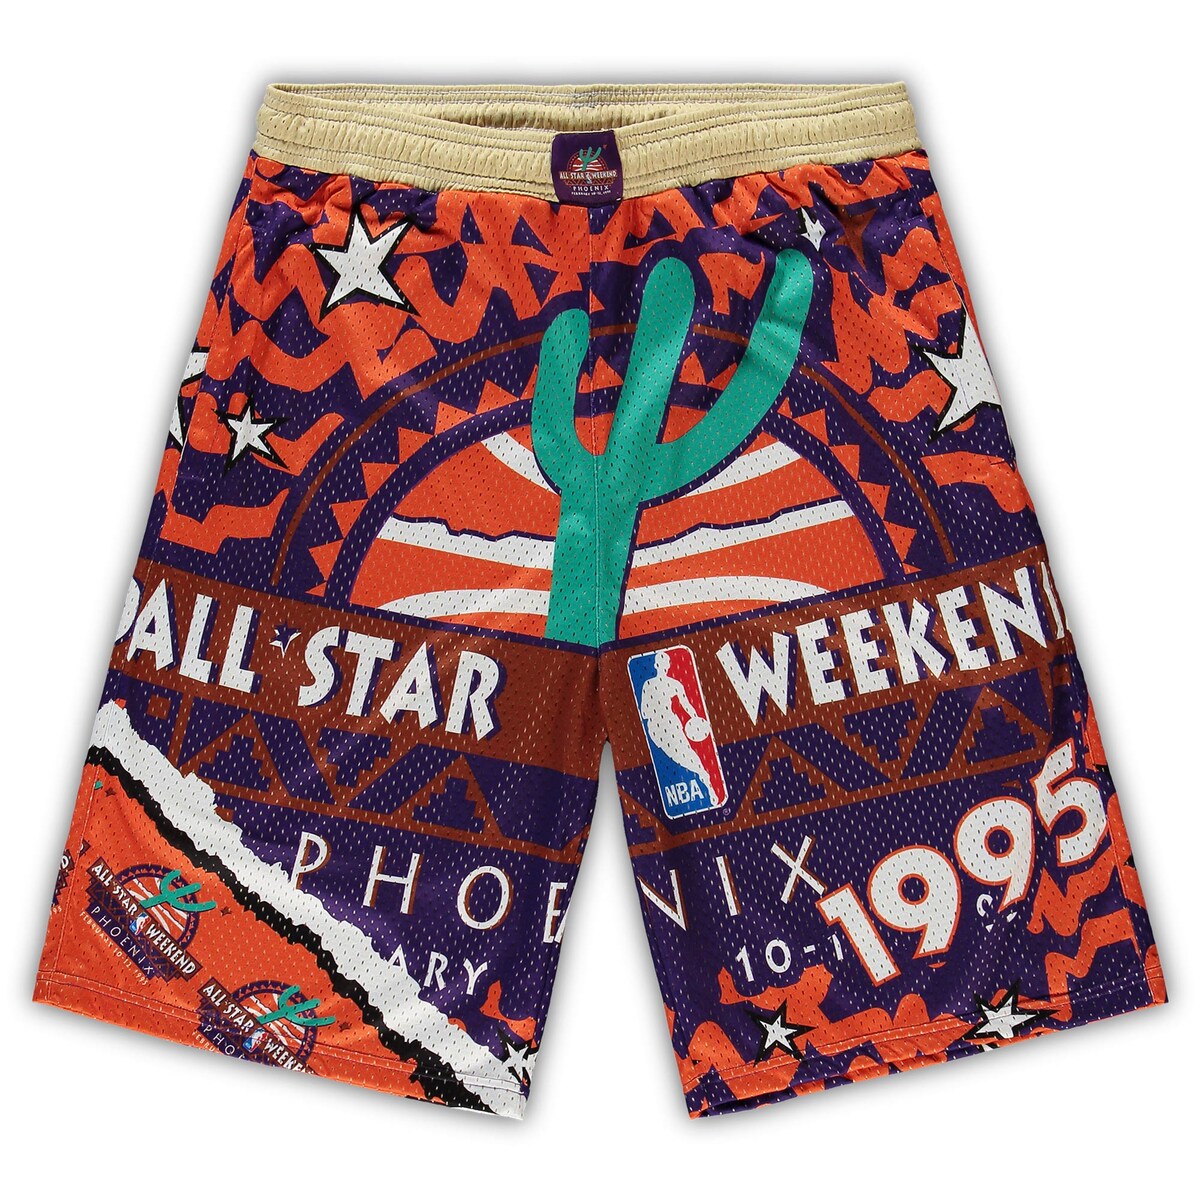 Relive the ambiance of the 1995 NBA All-Star Game with these fresh Hardwood Classics Jumbotron 2.0 shorts by Mitchell & Ness. They feature breathable mesh material, and an adjustable waistband for a customized fit. Plus, the sublimated NBA graphics add an authentic touch to these throwback-inspired bottoms.Inseam for size XLT approx. 11.5''Officially licensedMachine wash, tumble dry lowBrand: Mitchell & NessMaterial: 100% PolyesterSide slip pocketsImportedSublimated designMesh fabricElastic waistband with drawstring